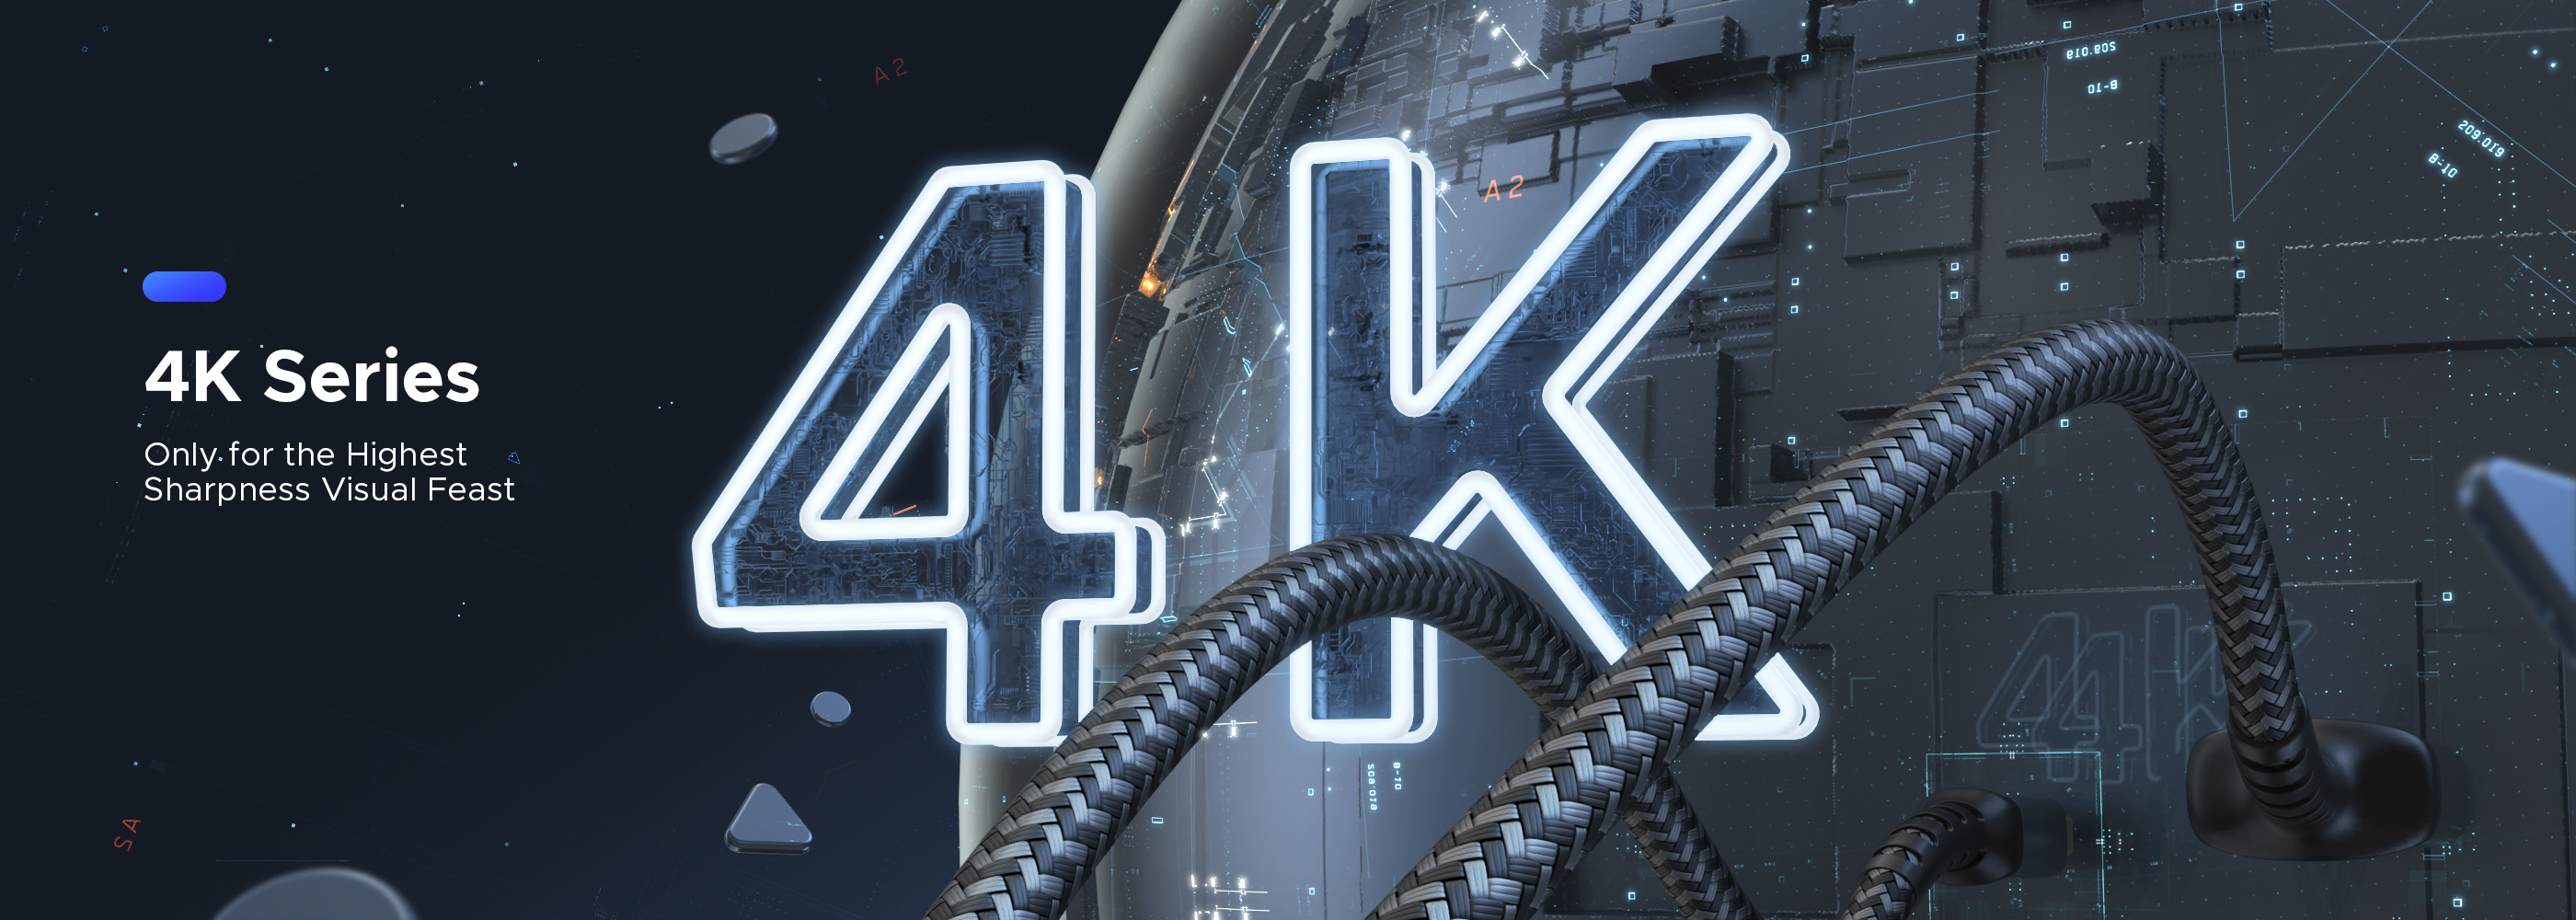 WARRKY's collection of 4K series